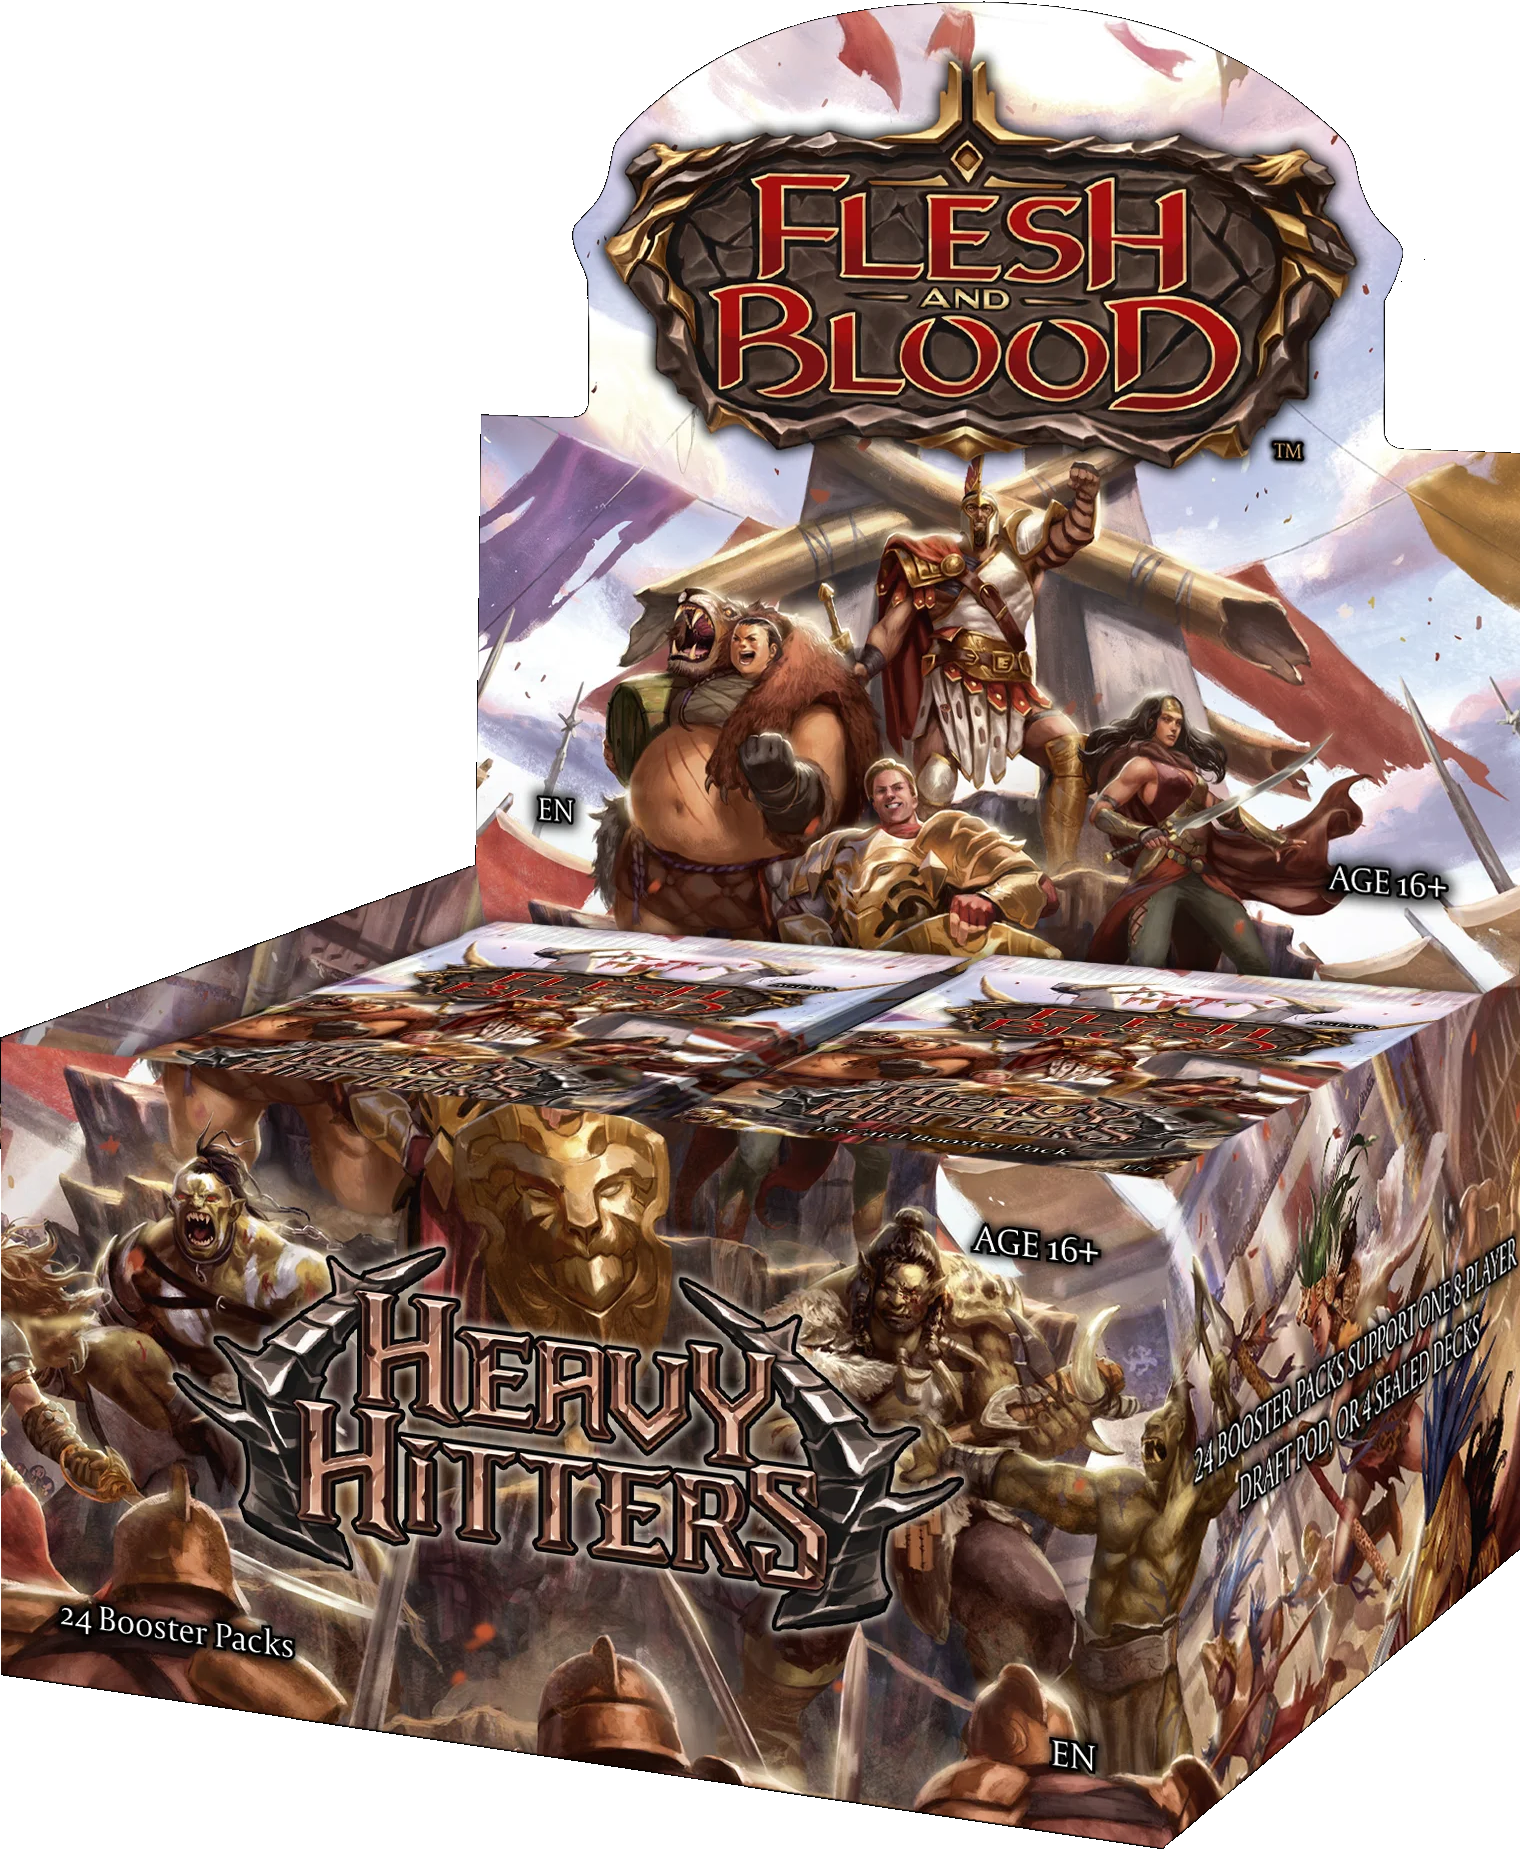 FLESH AND BLOOD HEAVY HITTERS BOOSTER